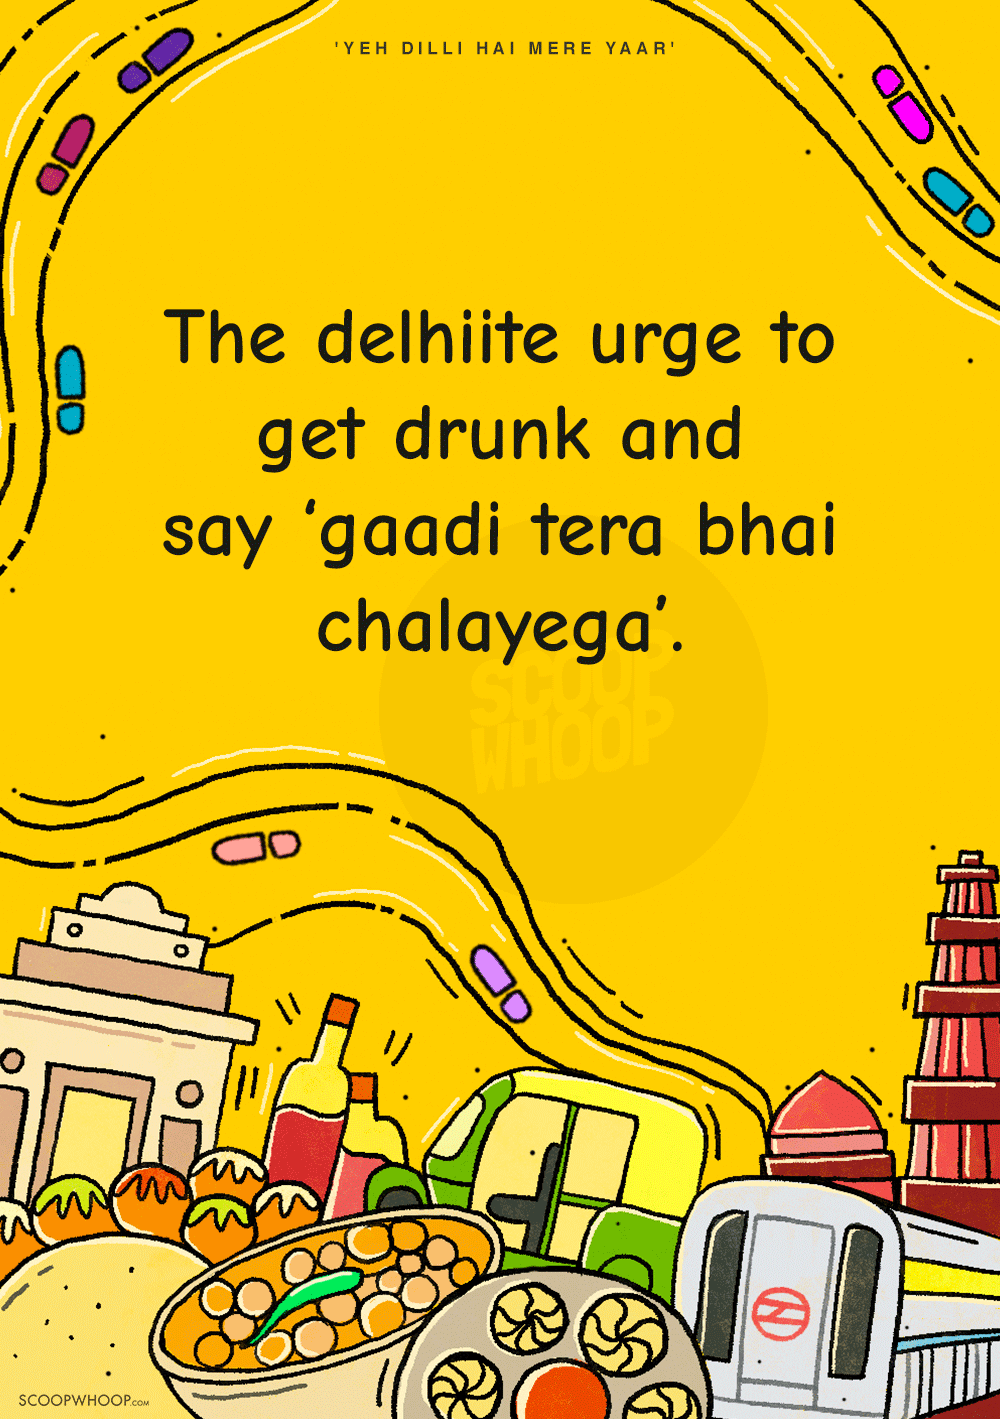 18 Accurate Urges That Only A True Dilliwaala Would Relate To